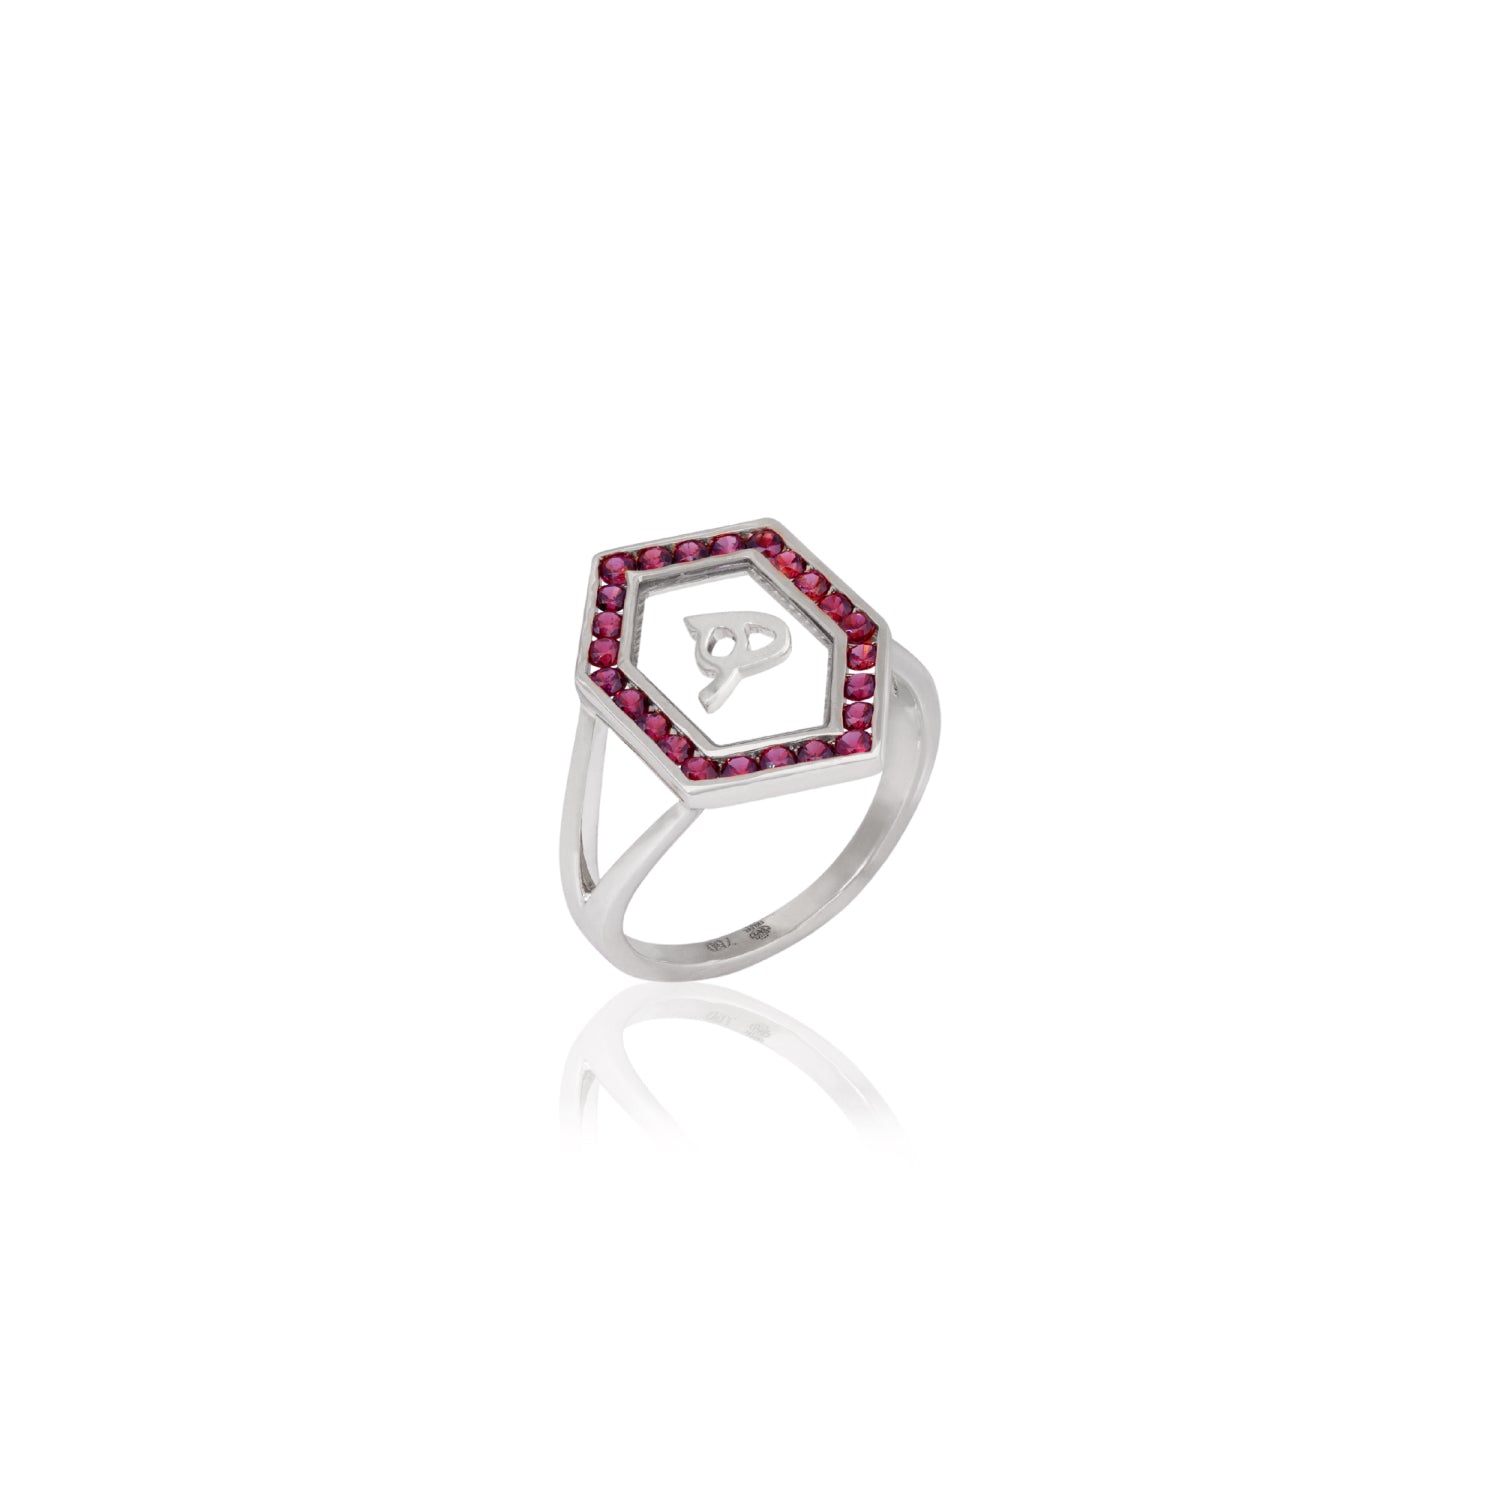 Qamoos 1.0 Letter هـ Ruby Ring in White Gold